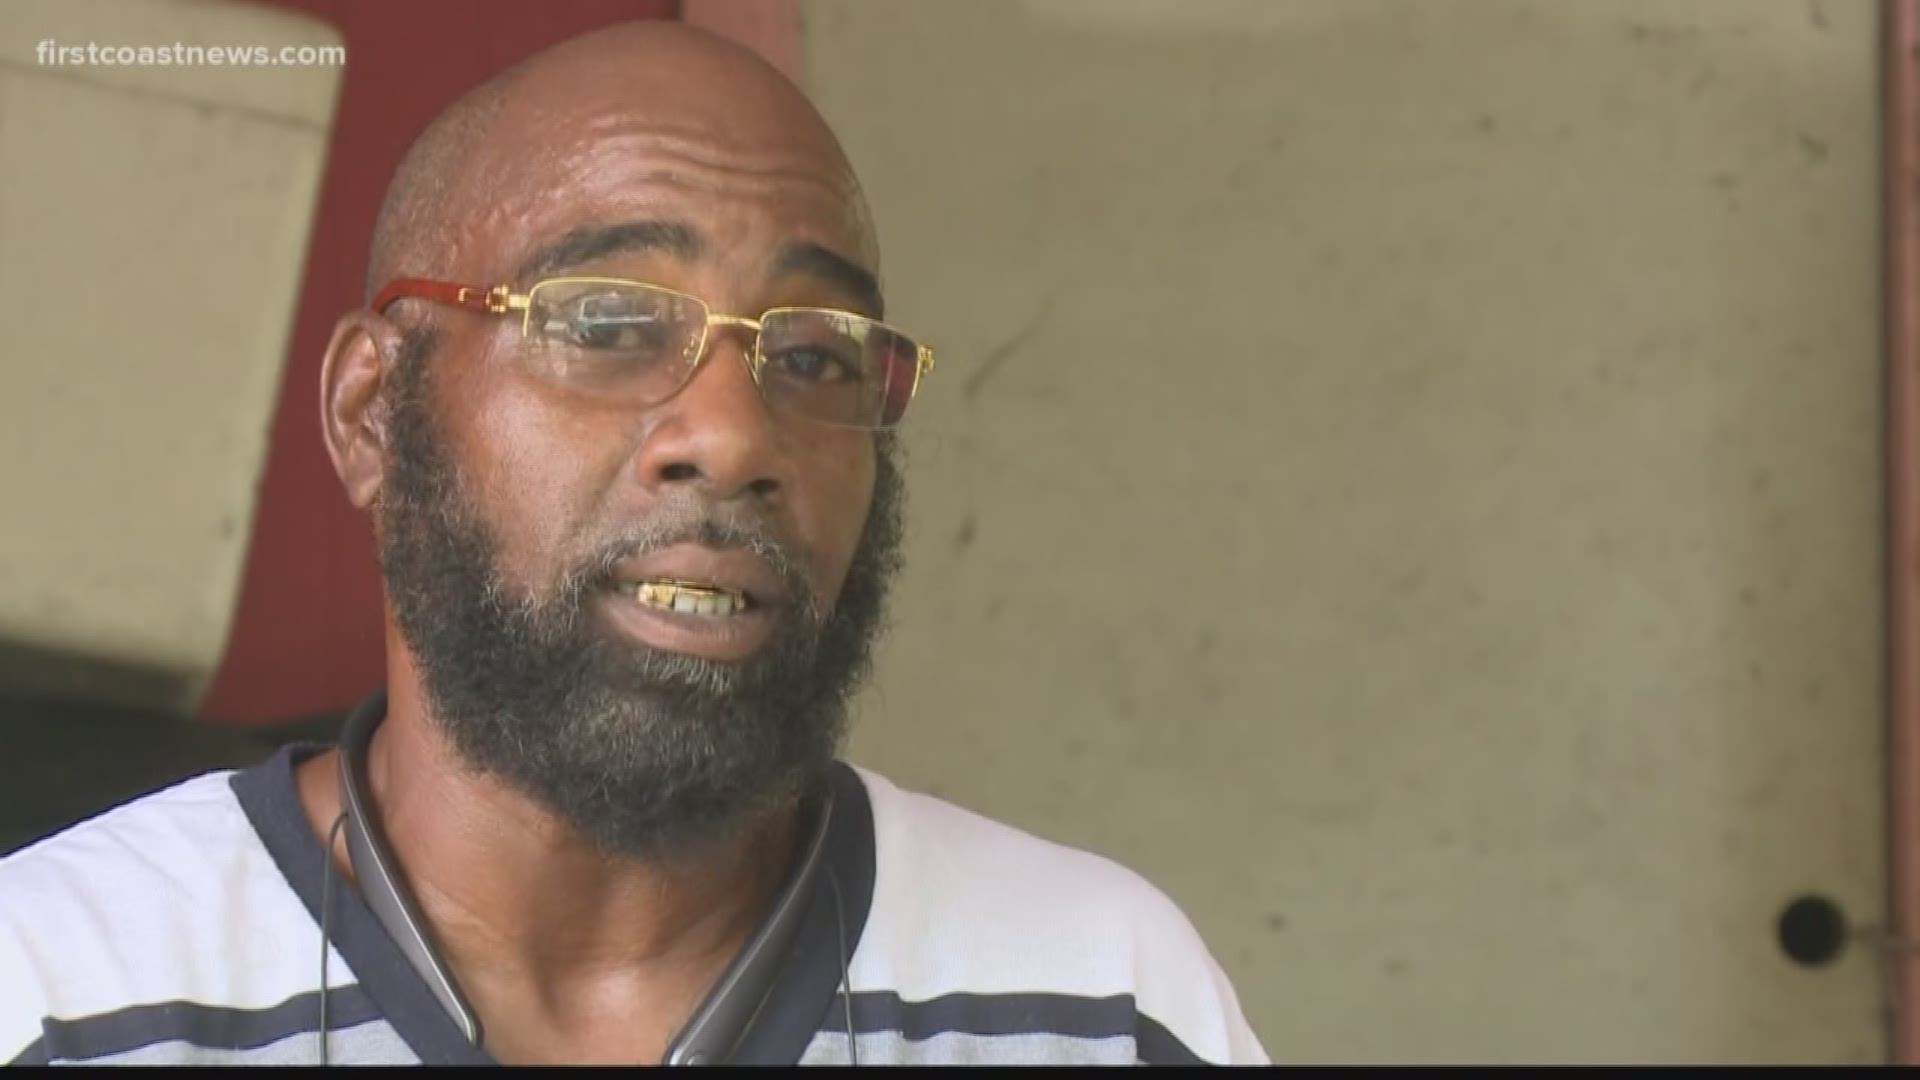 The father of Jovan Mills believes his son was targeted in the reported drive-by shooting early Wednesday morning as he was walking to his bus stop. The shooter is still at large and his son is still in the hospital.